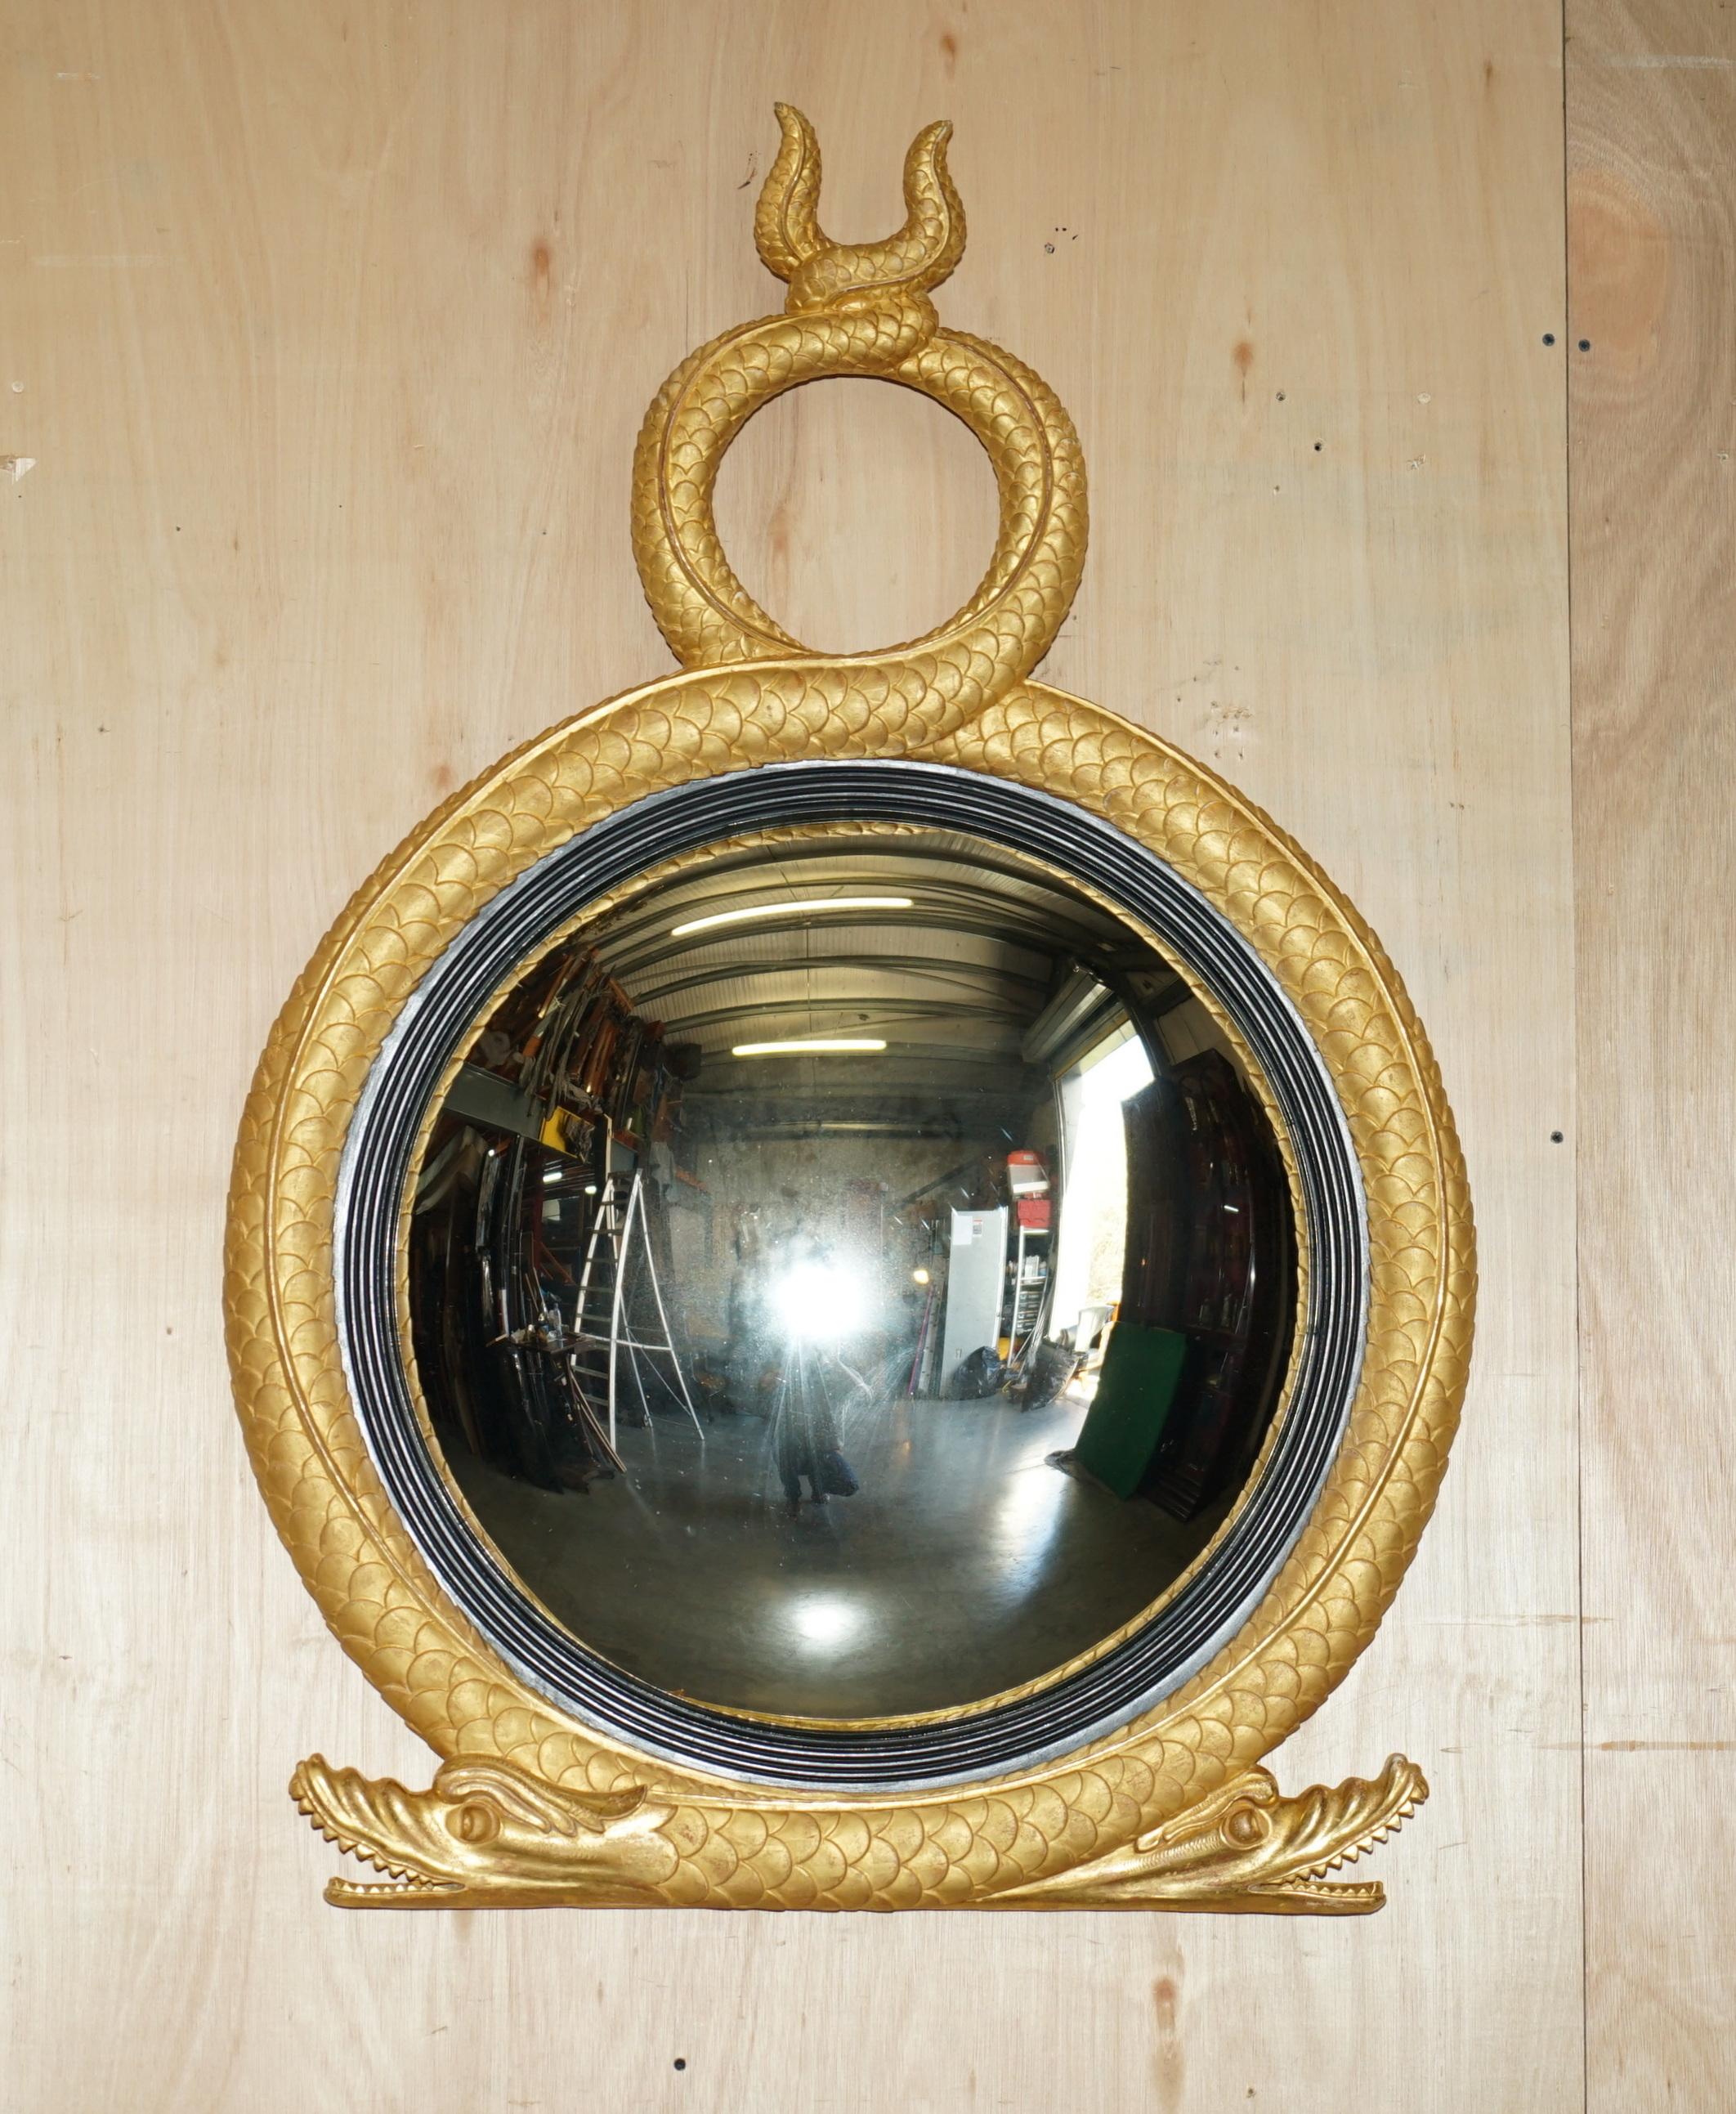 Royal House Antiques

Royal House Antiques is delighted to offer for sale this stunning pair of English Regency style gold gilt extra large Twin Serpent Convex mirrors

Please note the delivery fee listed is just a guide, it covers within the M25